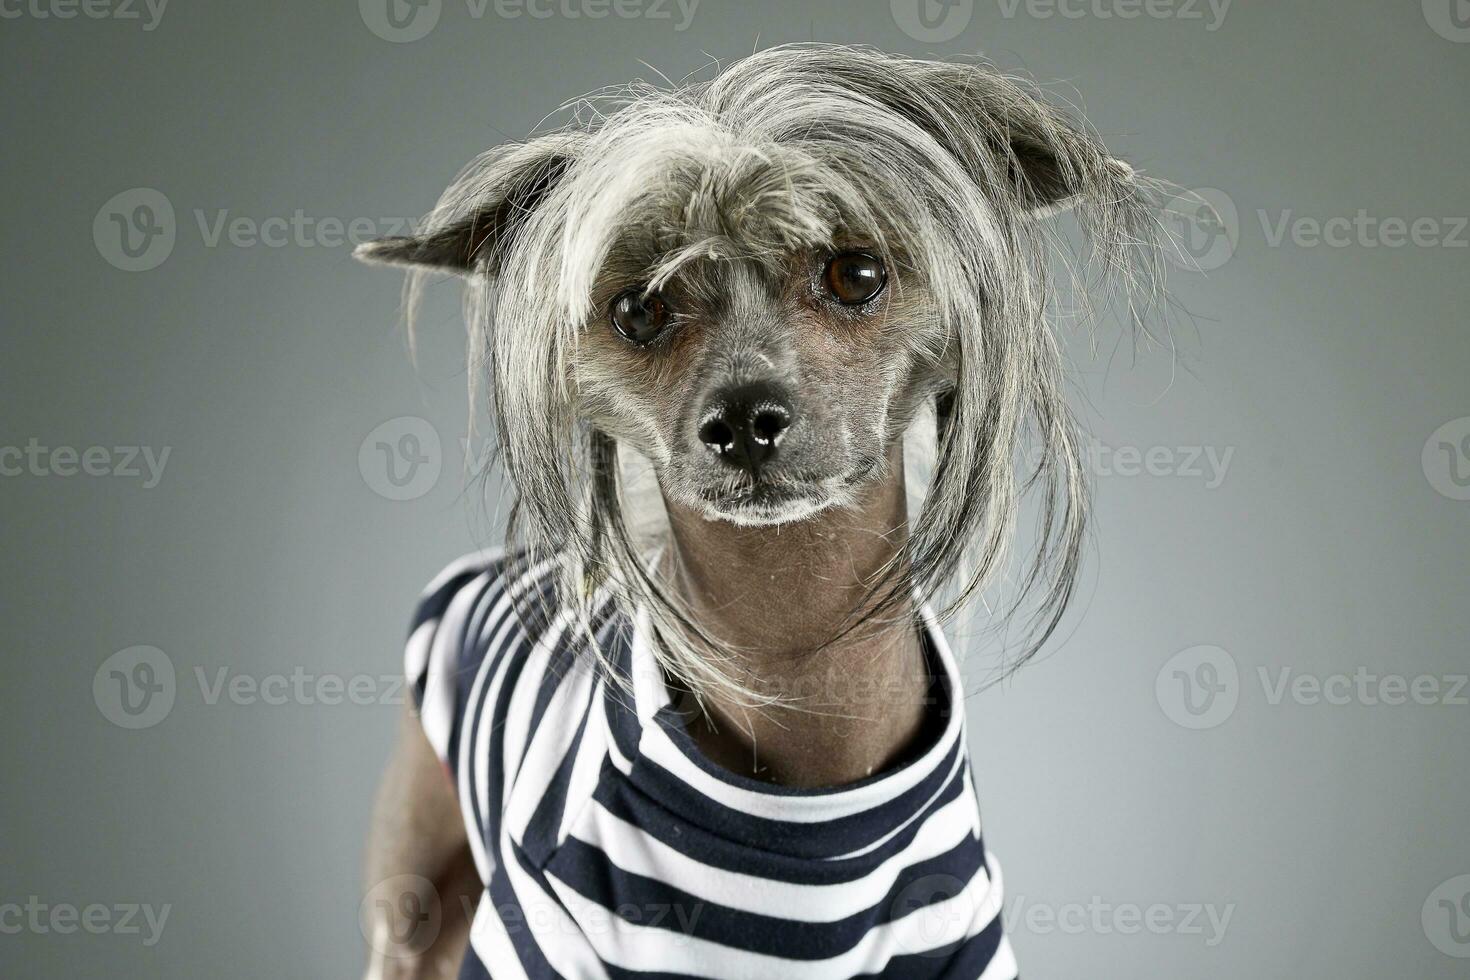 Chinese crested dog in a gray background photo studio